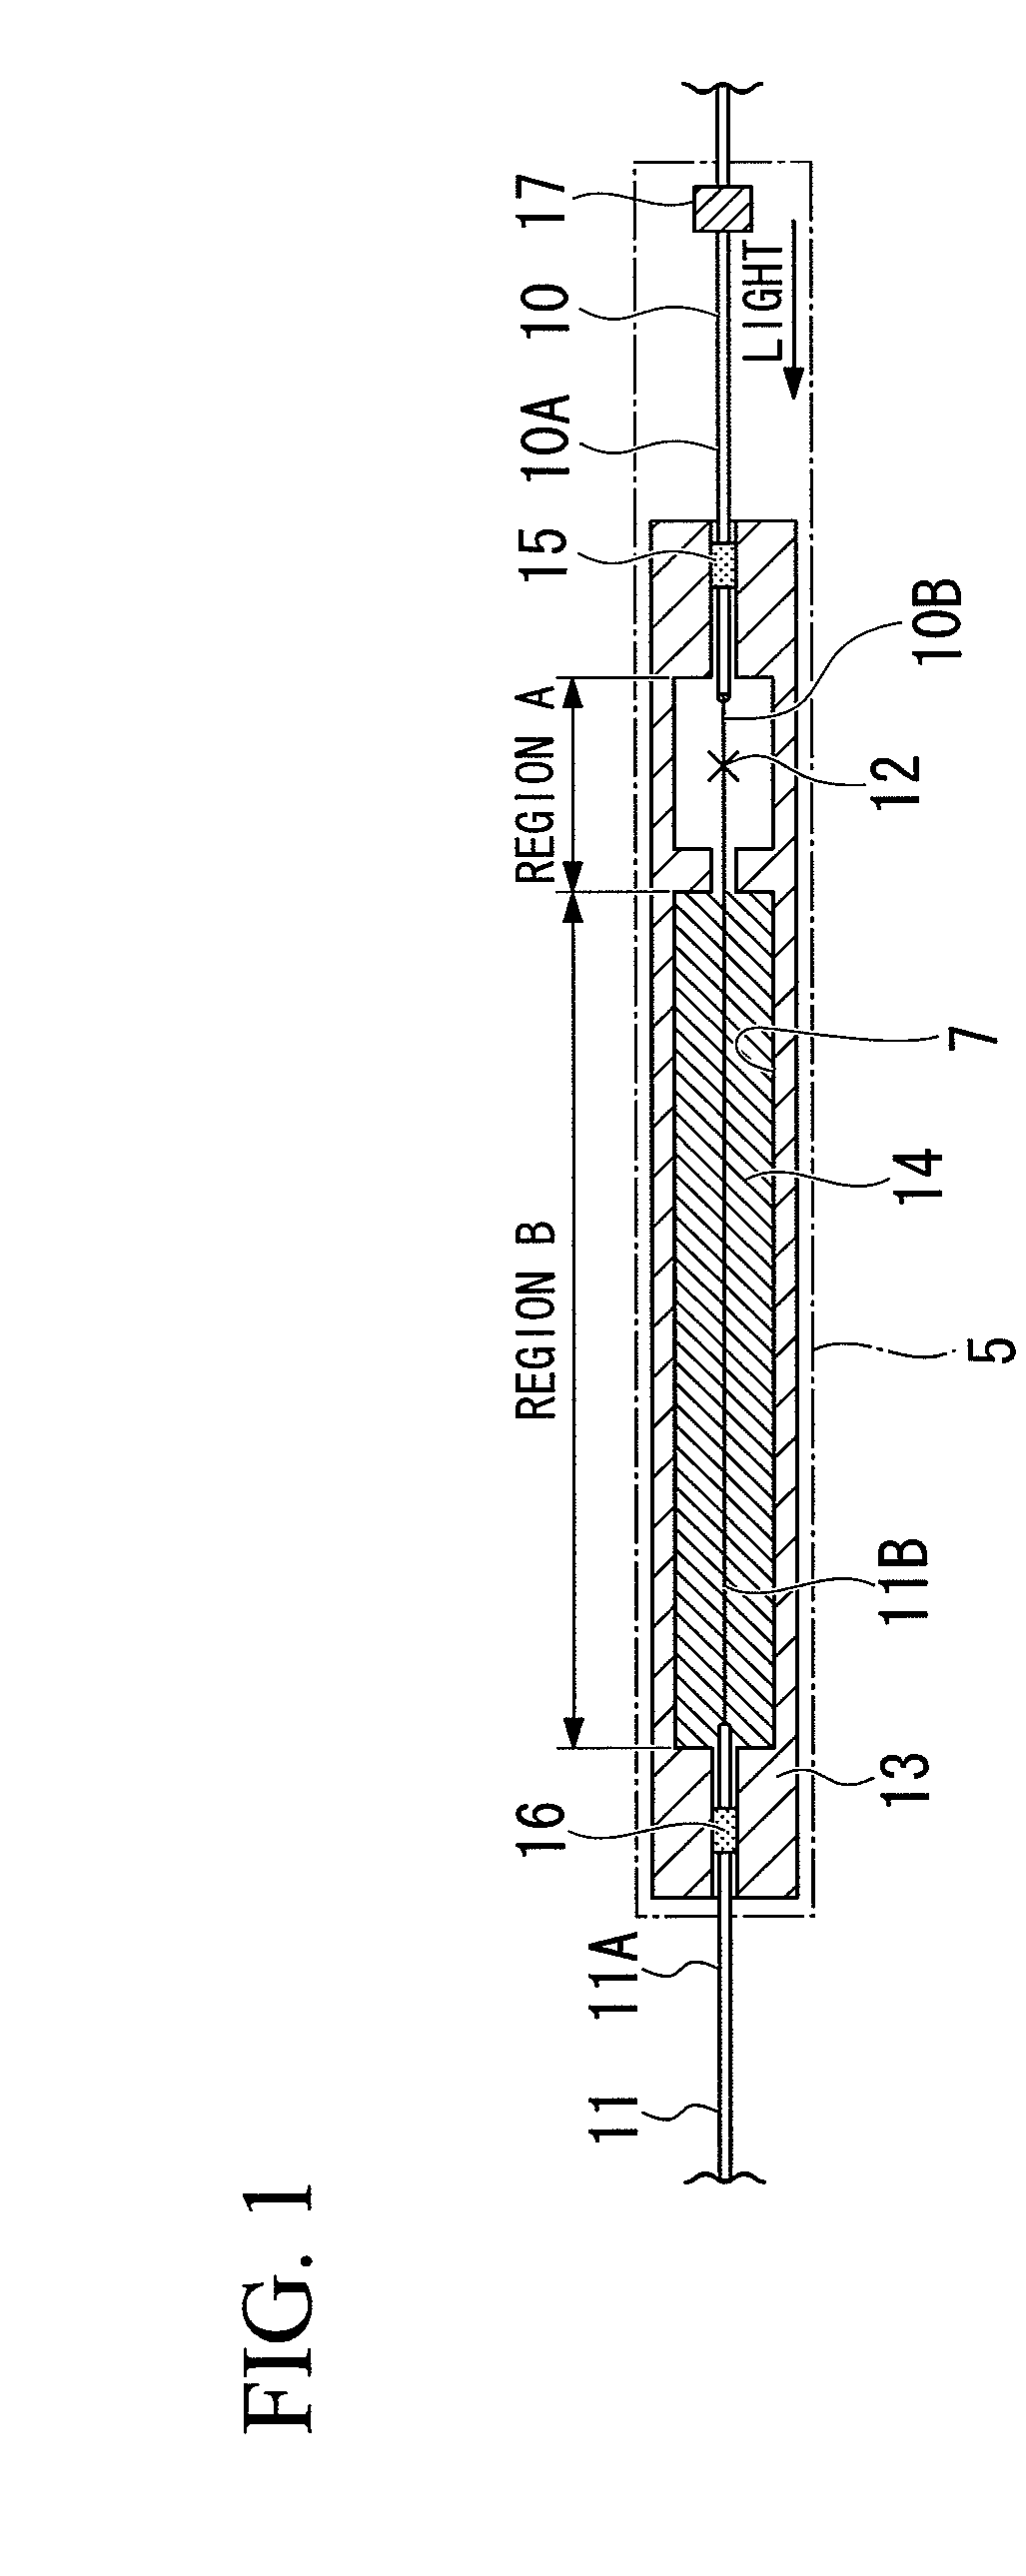 Fusion splicing structure of optical fibers